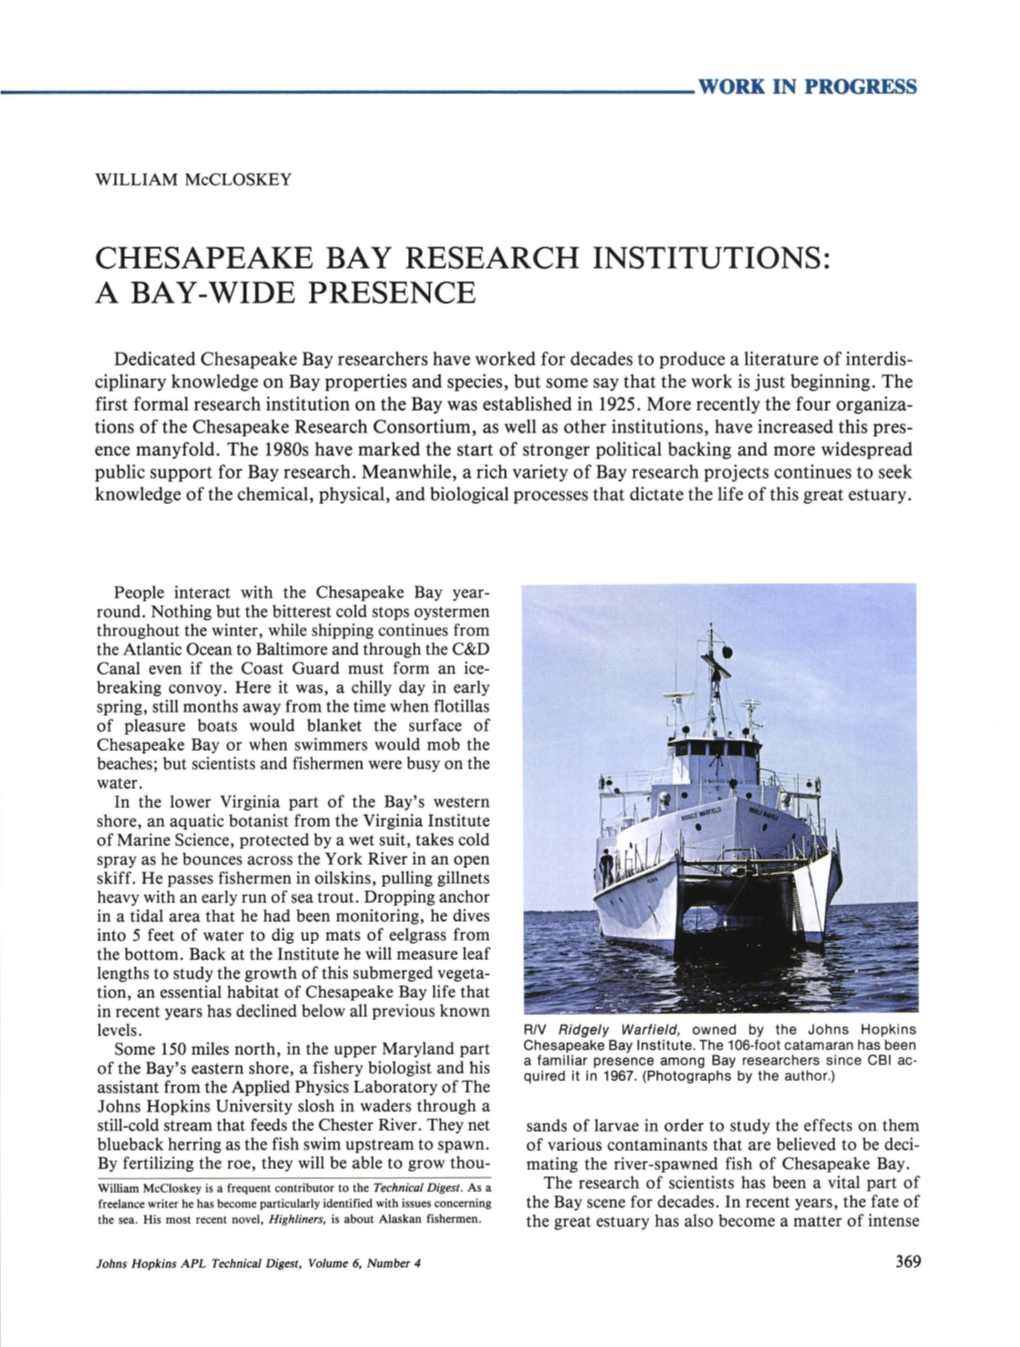 Chesapeake Bay Research Institutions: a Bay-Wide Presence